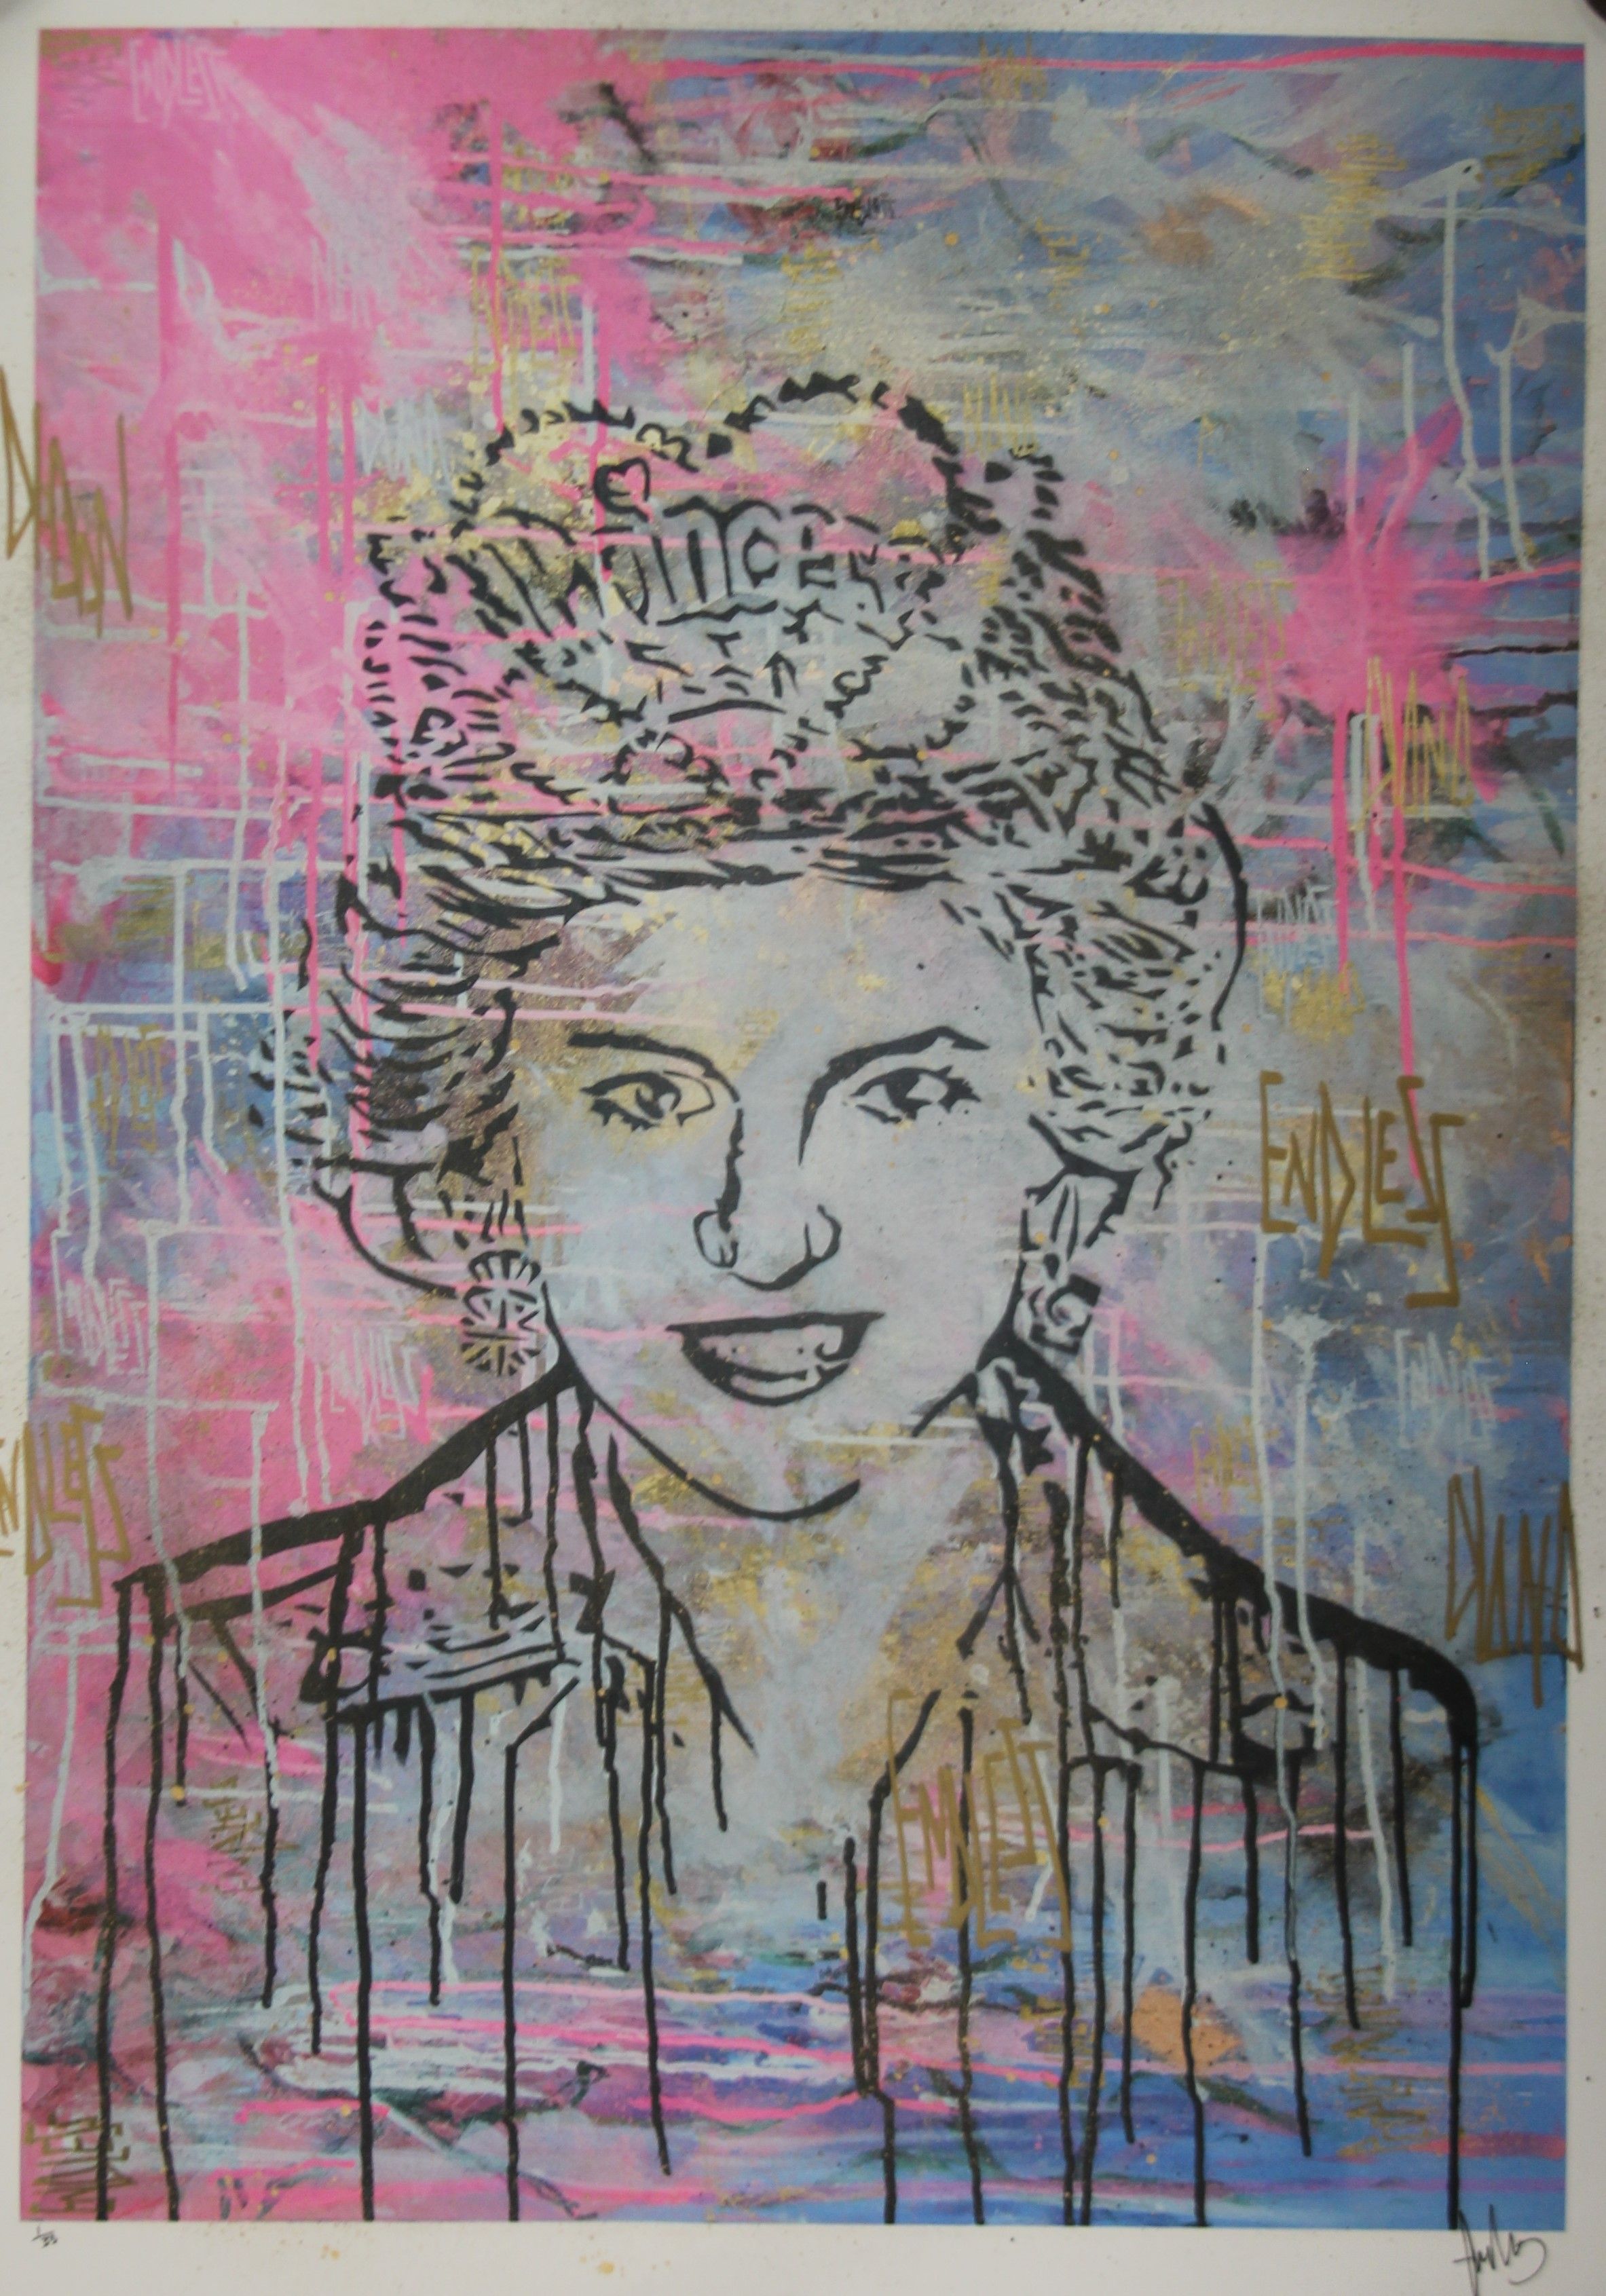 ENDLESS (British), Diana, limited edition hand embellished print, numbered 1/35, - Image 2 of 3